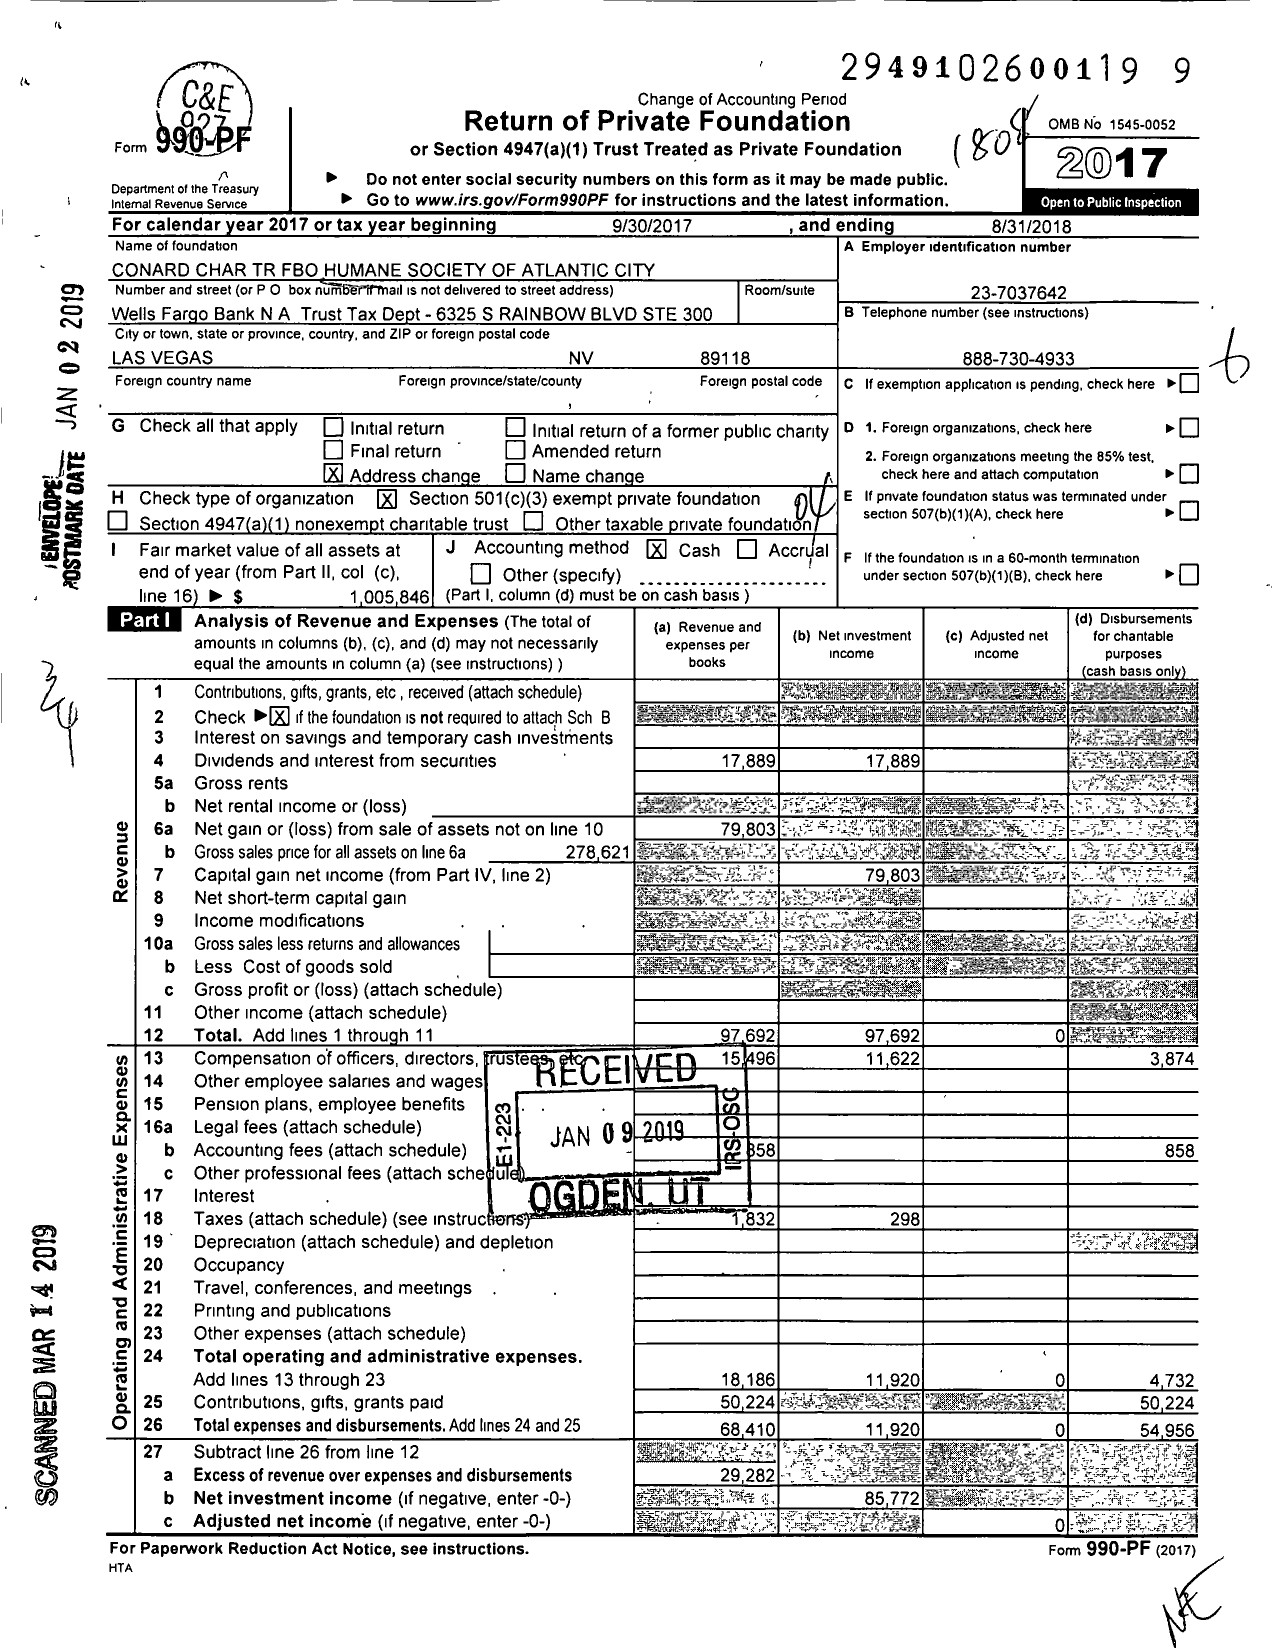 Image of first page of 2017 Form 990PF for Conard Char Trust